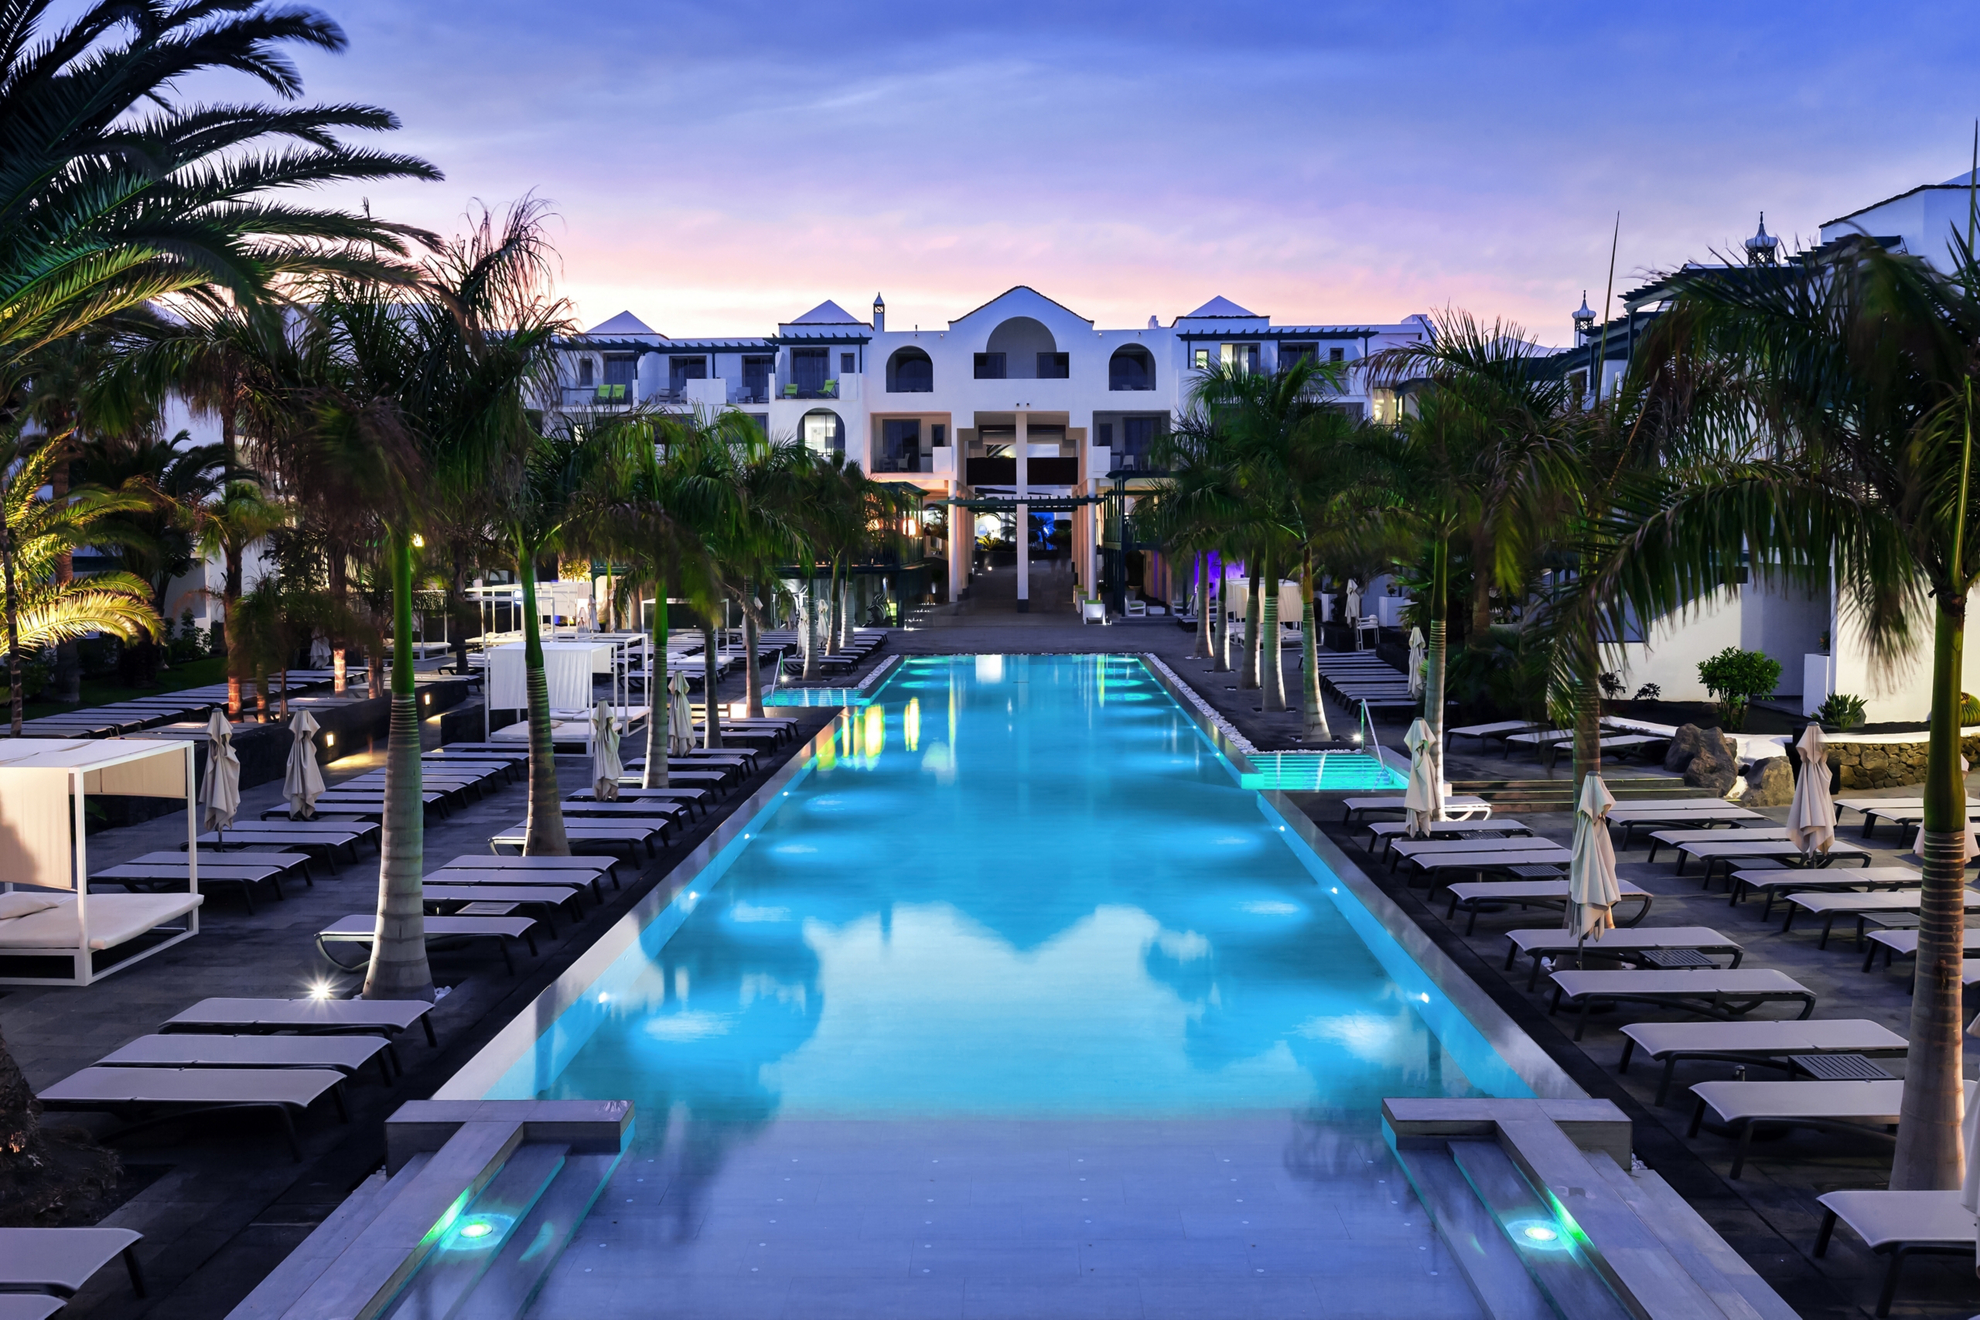 Adults only hotels in Spain: Barceló Teguise Beach hotel illuminated at night